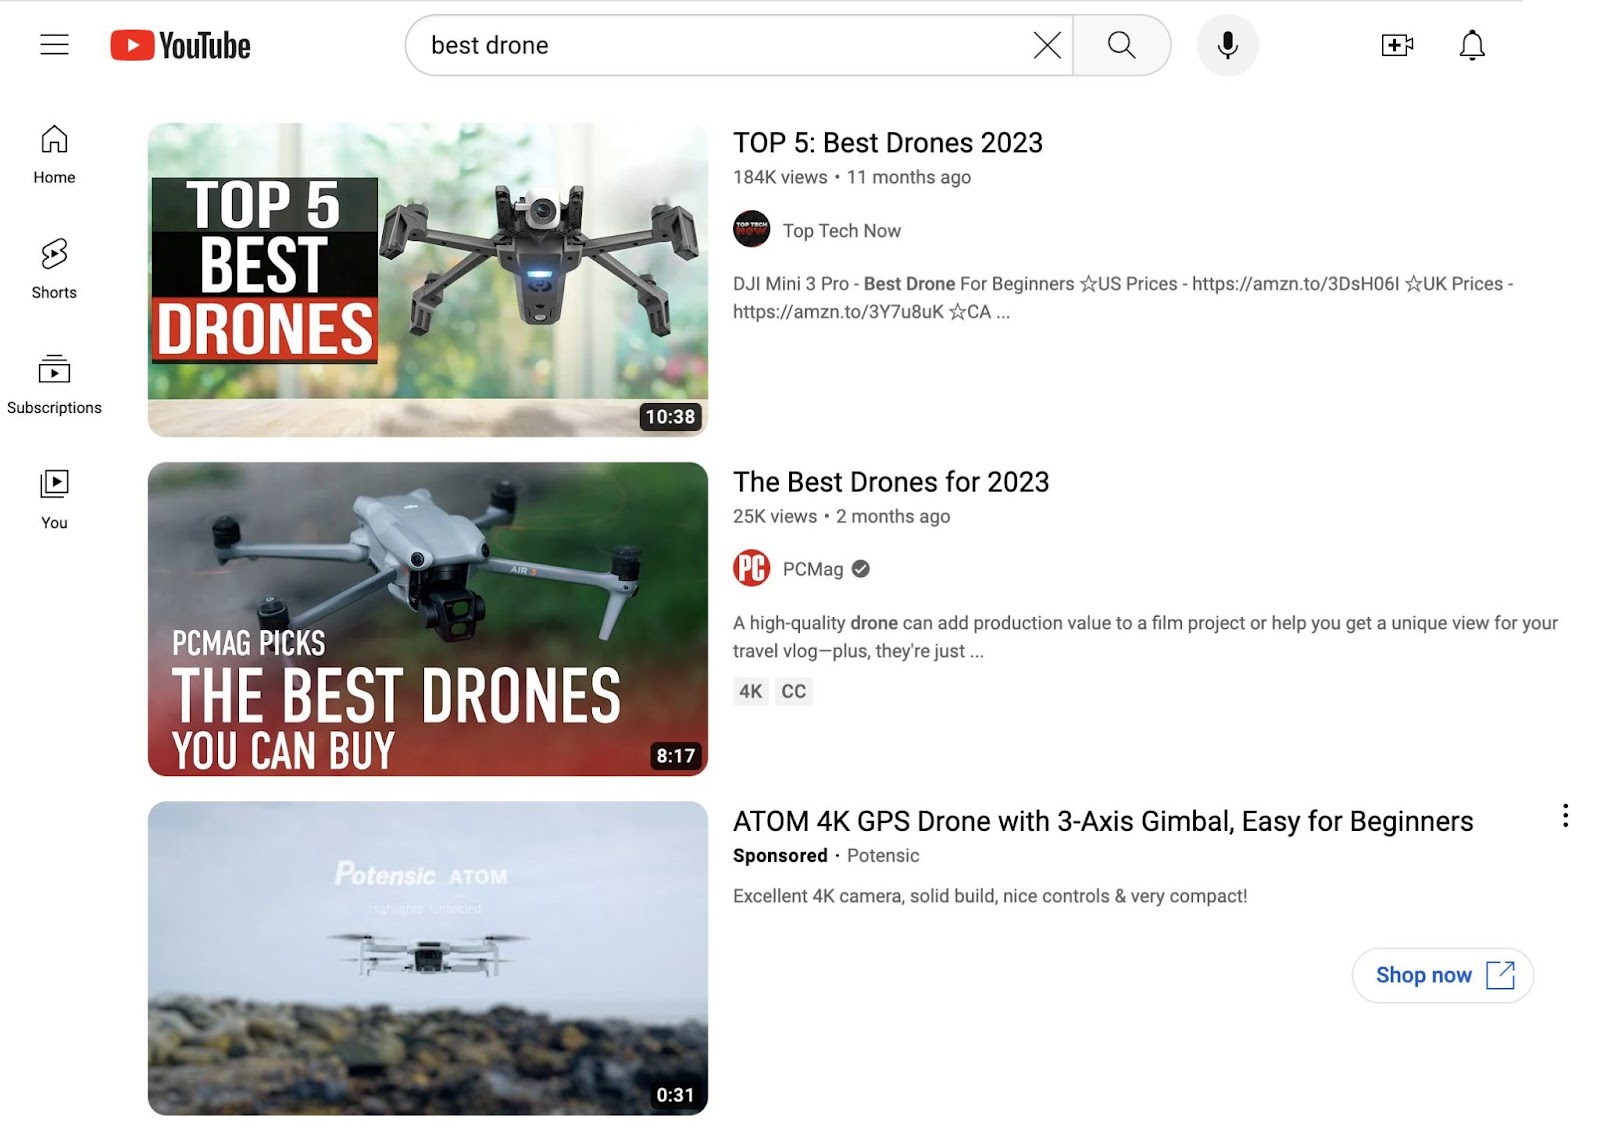 YouTube's search results for "best drone"